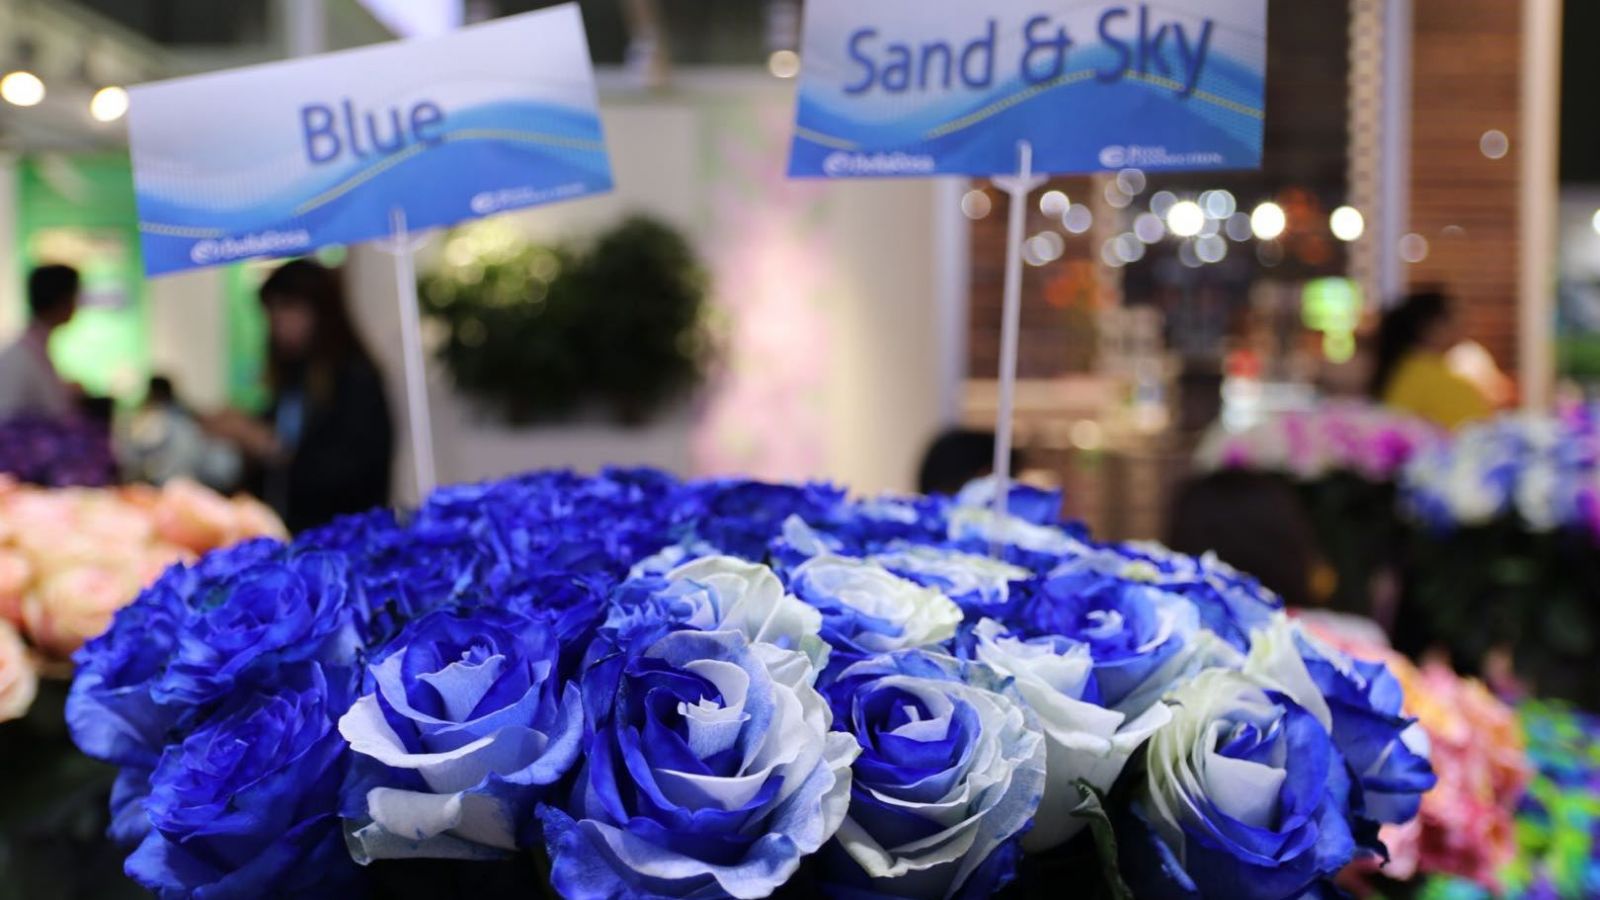 Blue and Sand & Sky roses